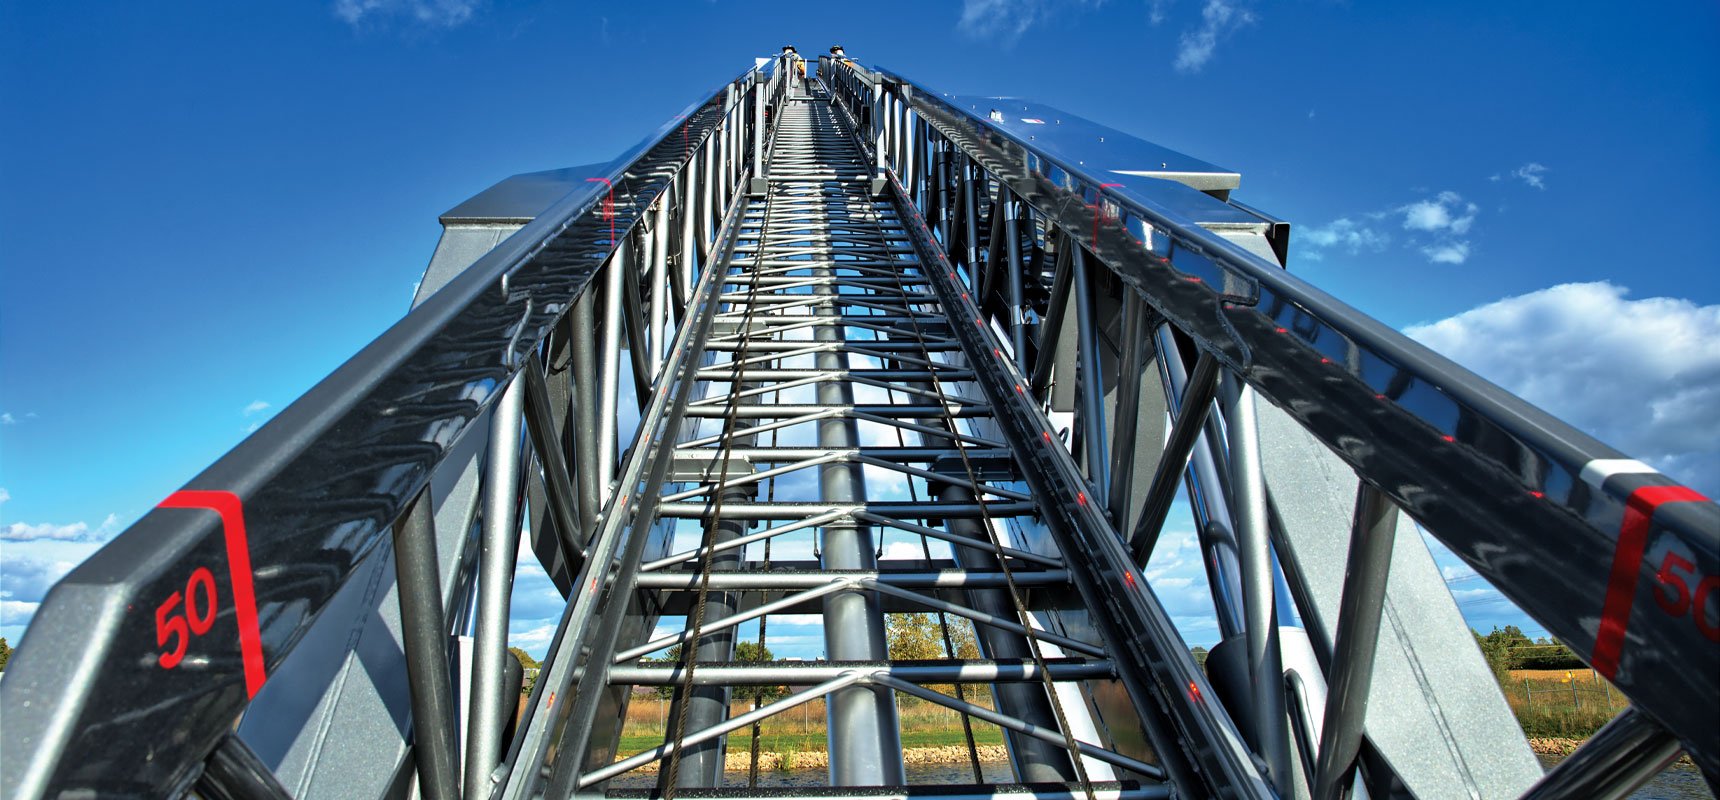 An elevated aerial ladder is pictured extended up to a blue sky with clouds overhead.